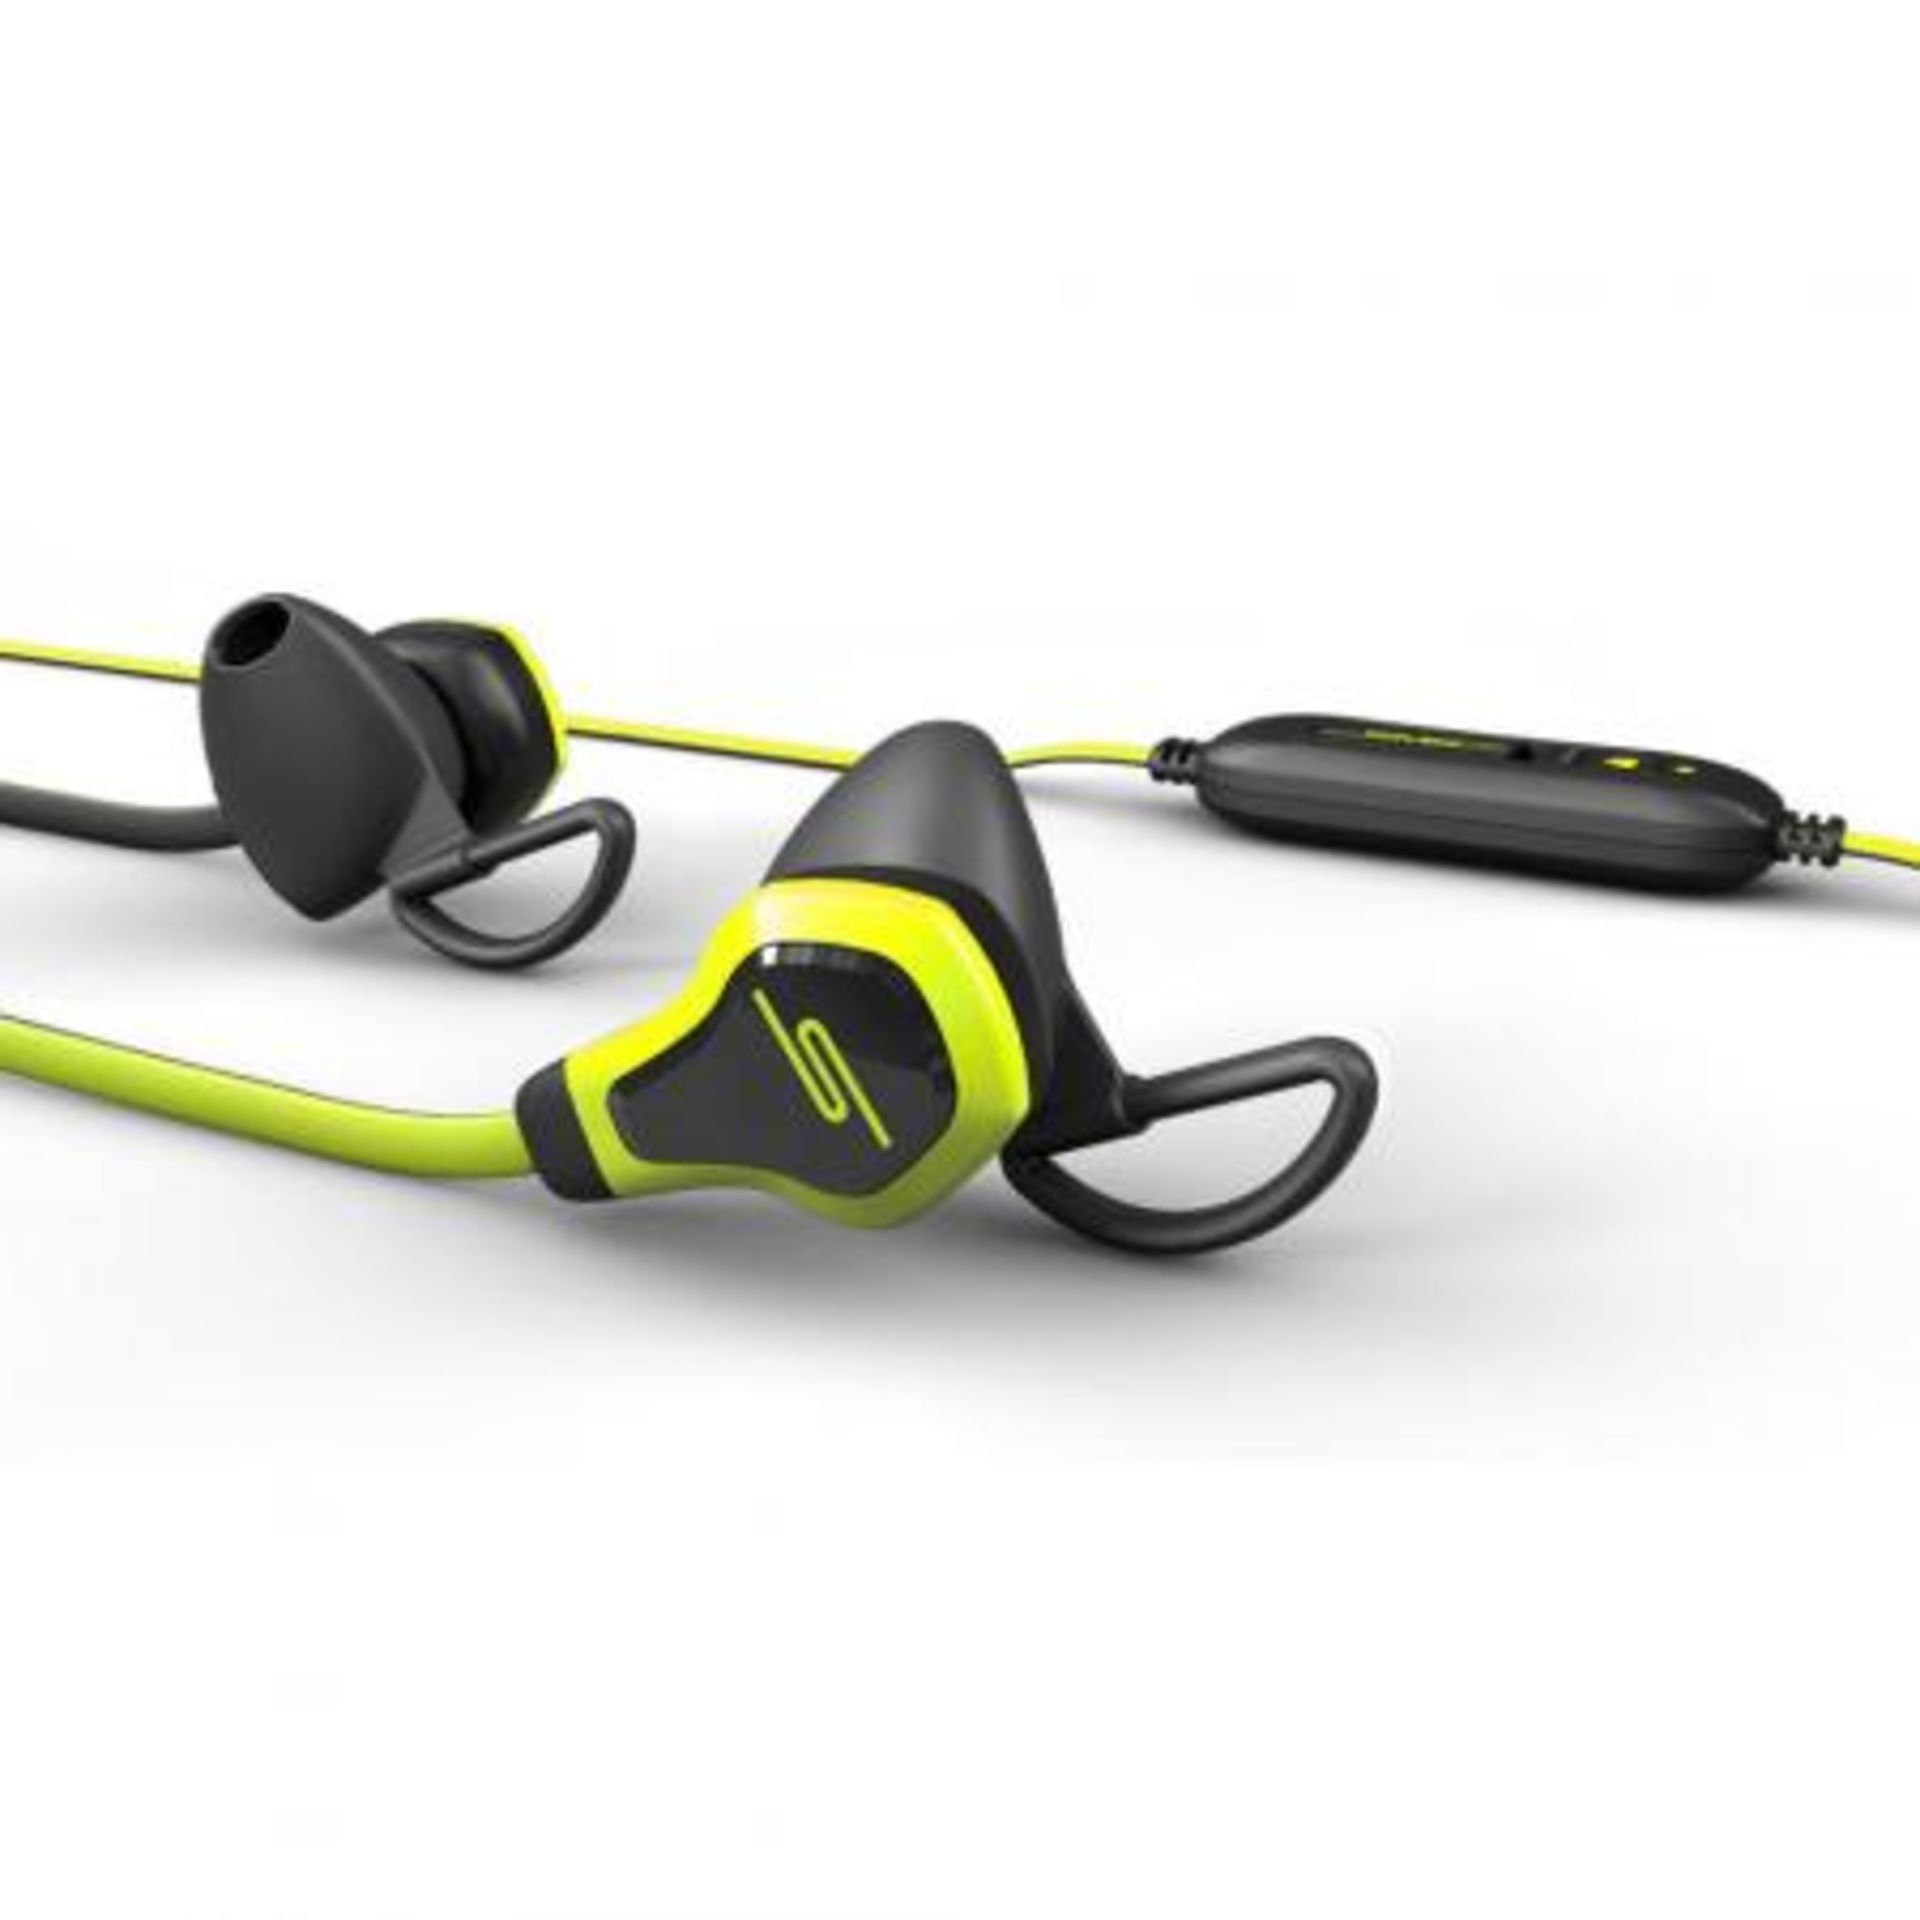 V Brand New SMS Audio BioSport Earphones - RRP £149.99 - Heart Rate Monitor Measures Changes In - Image 3 of 5